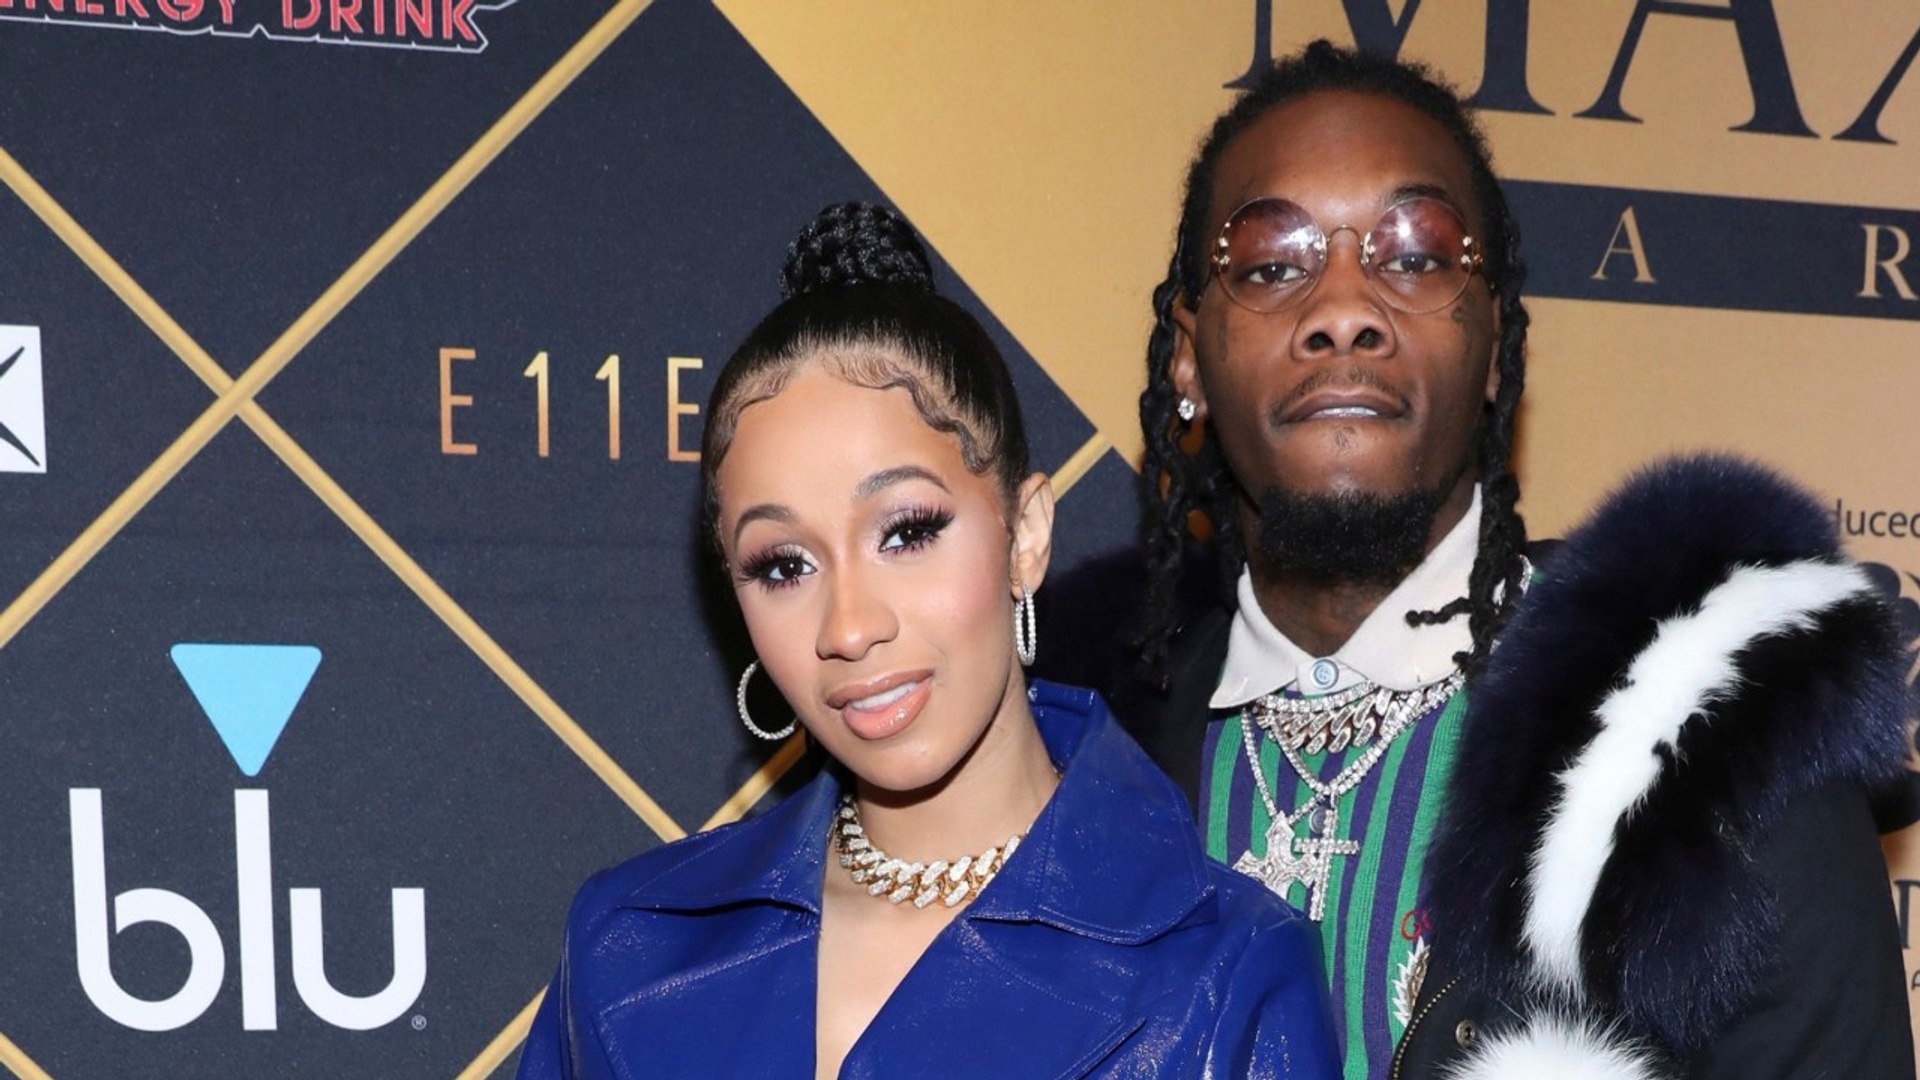 Are Cardi B and Offset Already Married?